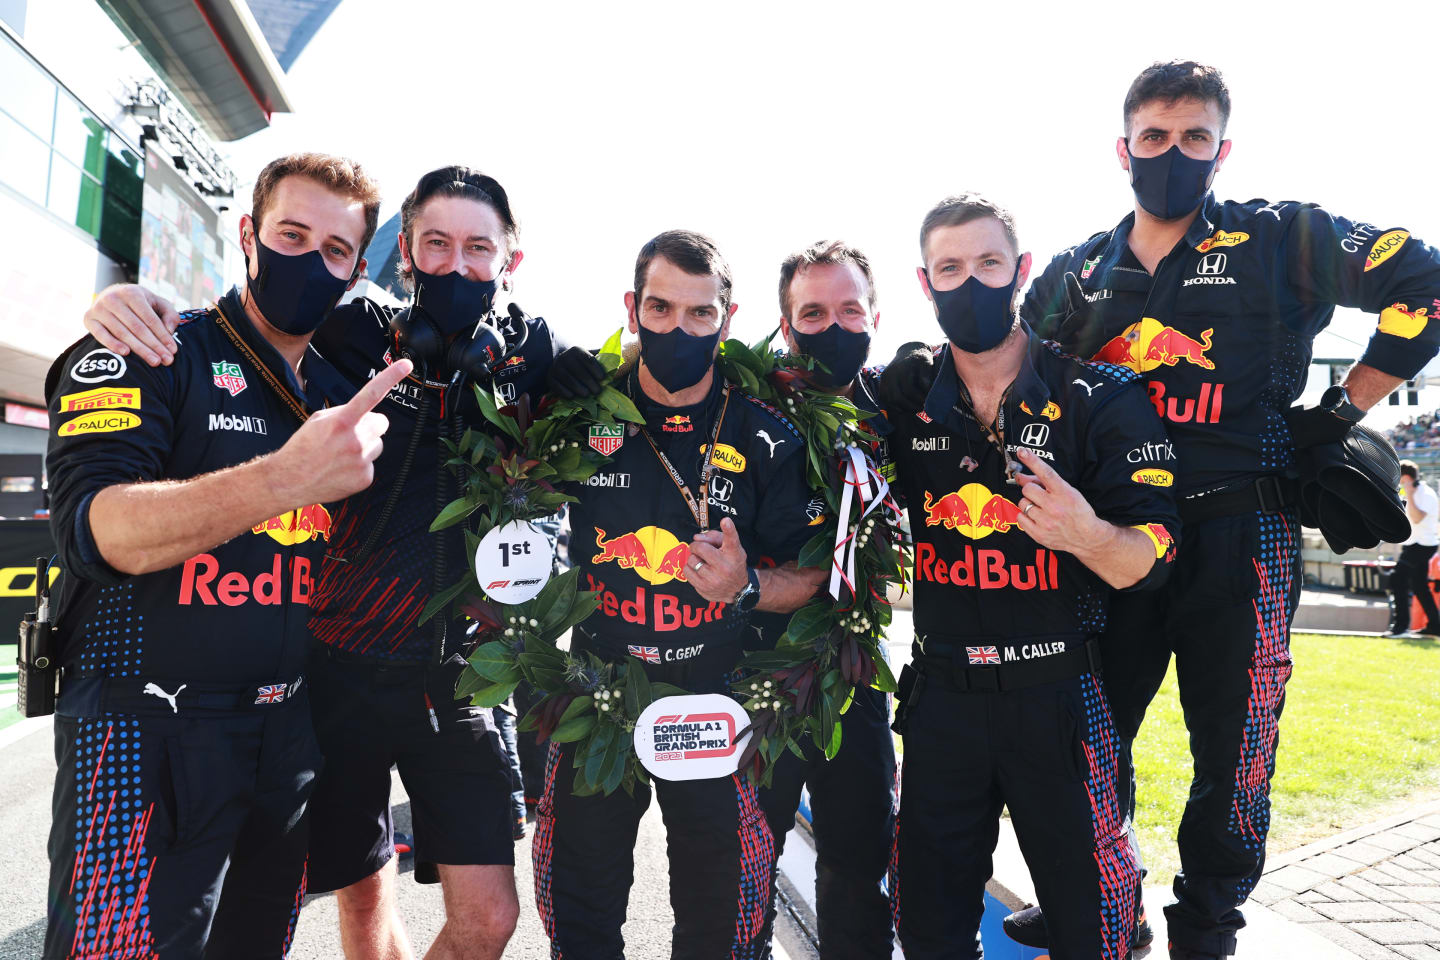 NORTHAMPTON, ENGLAND - JULY 17: The Red Bull Racing team celebrate after the Sprint for the F1 Grand Prix of Great Britain at Silverstone on July 17, 2021 in Northampton, England. (Photo by Mark Thompson/Getty Images)